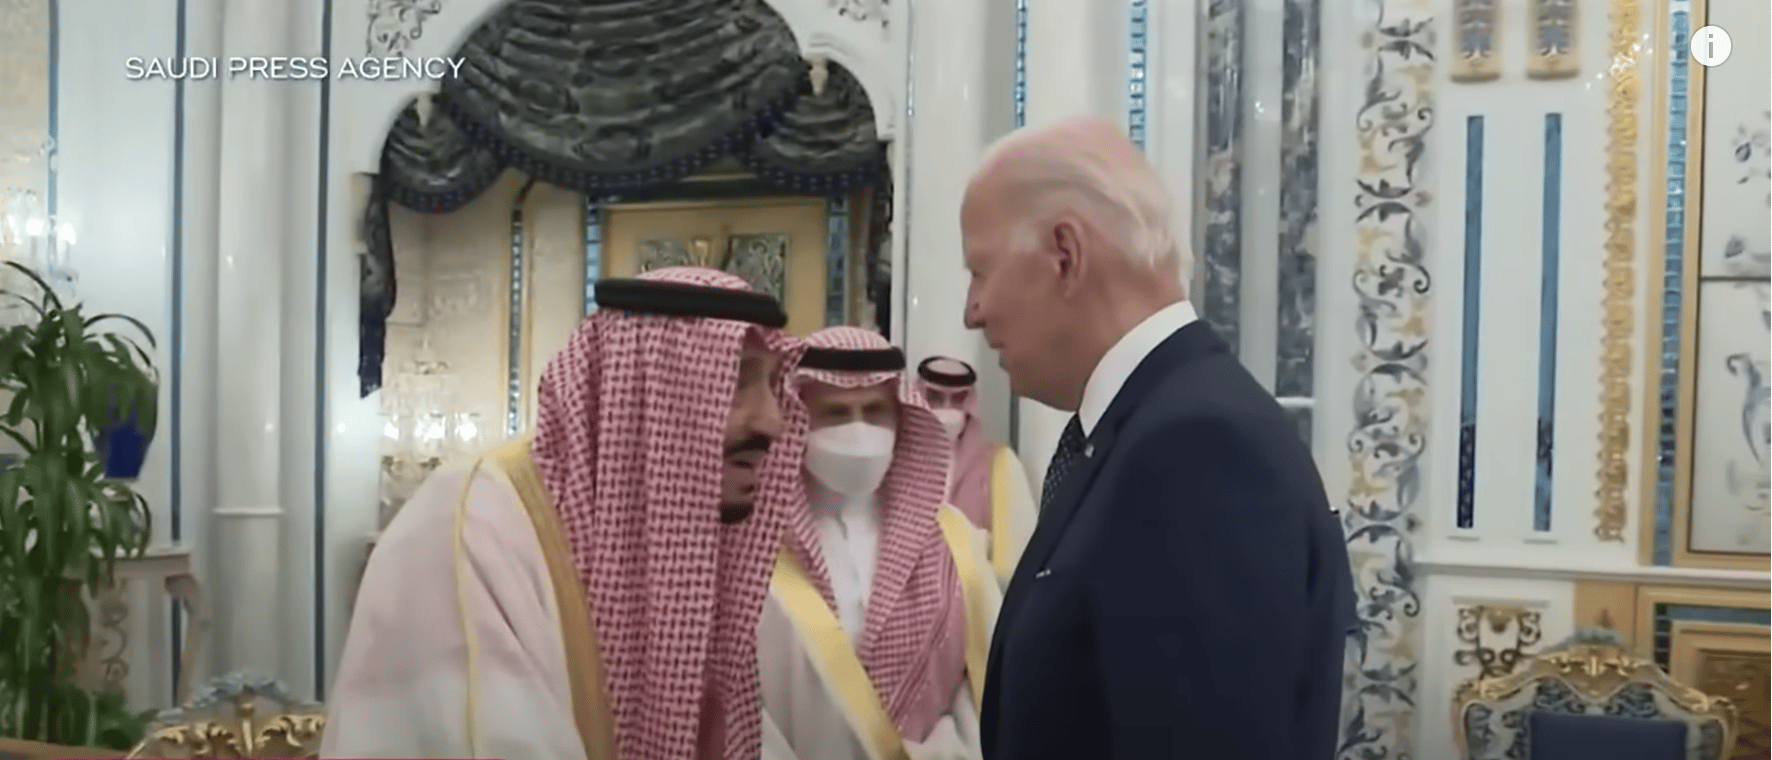 Saudi prince sends threat to the West after Biden warns of consequences for kingdom